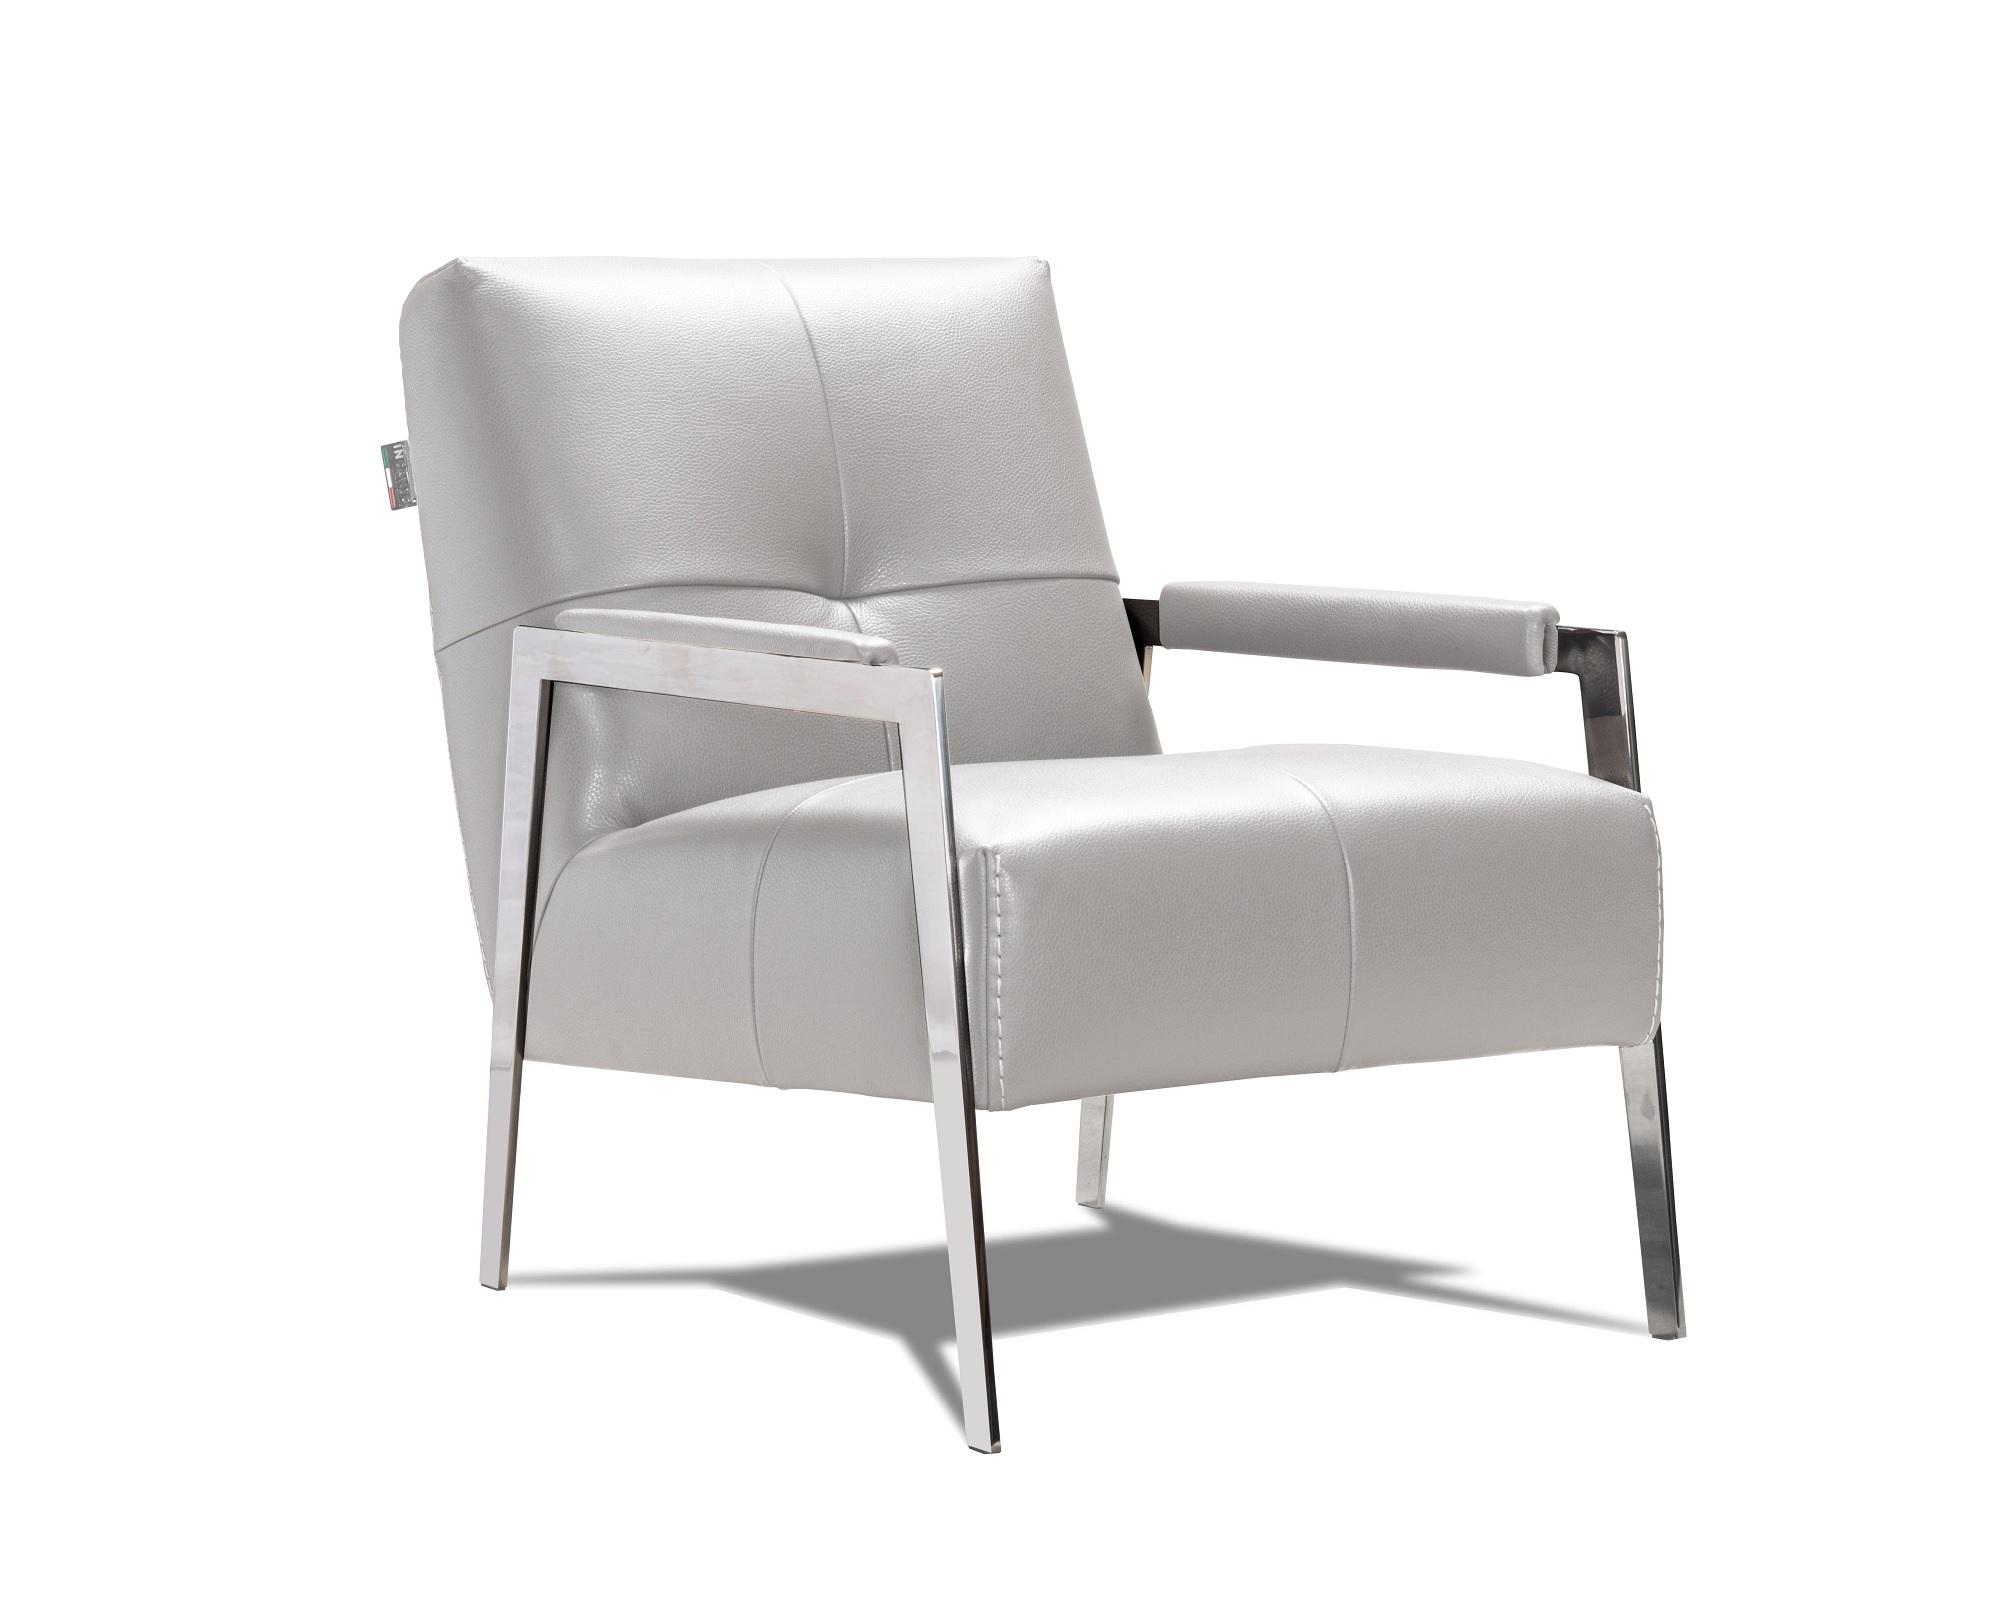 Contemporary Arm Chairs I765 SKU 17445 in Gray Leather